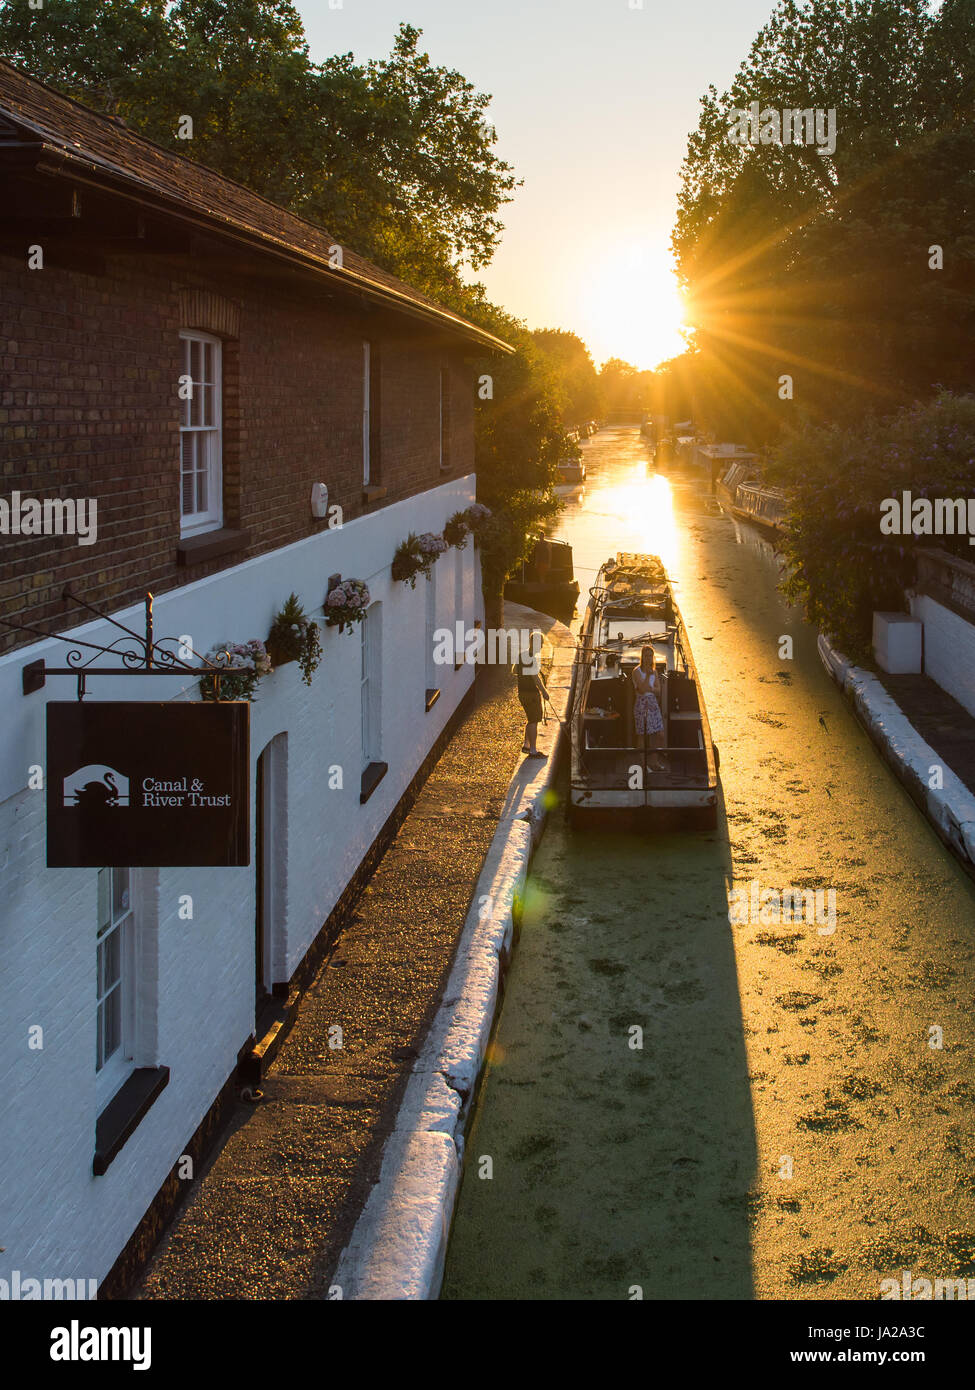 London, England - July 19, 2016: A narrowboat passes the Canal & River Trust offices at Little Venice in Paddington, Central London. Stock Photo